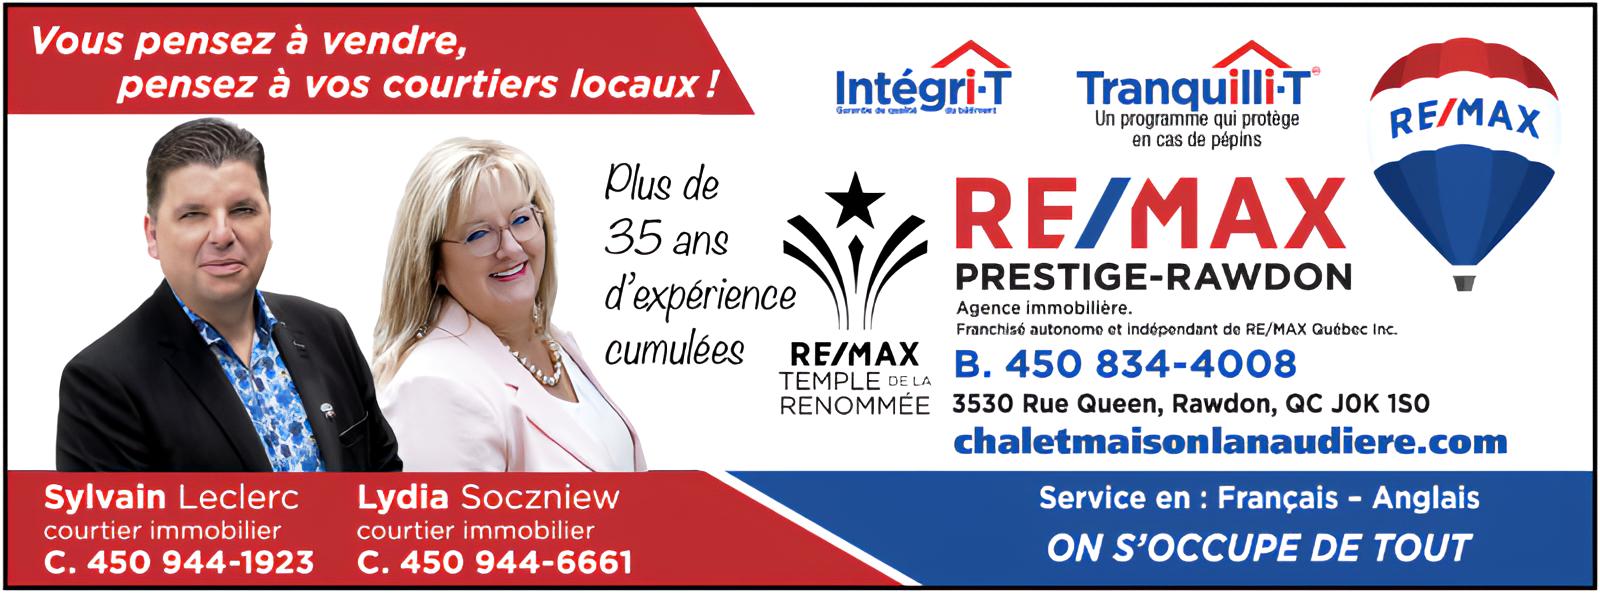 courtiers immobiliers lanaudiere - optimisée